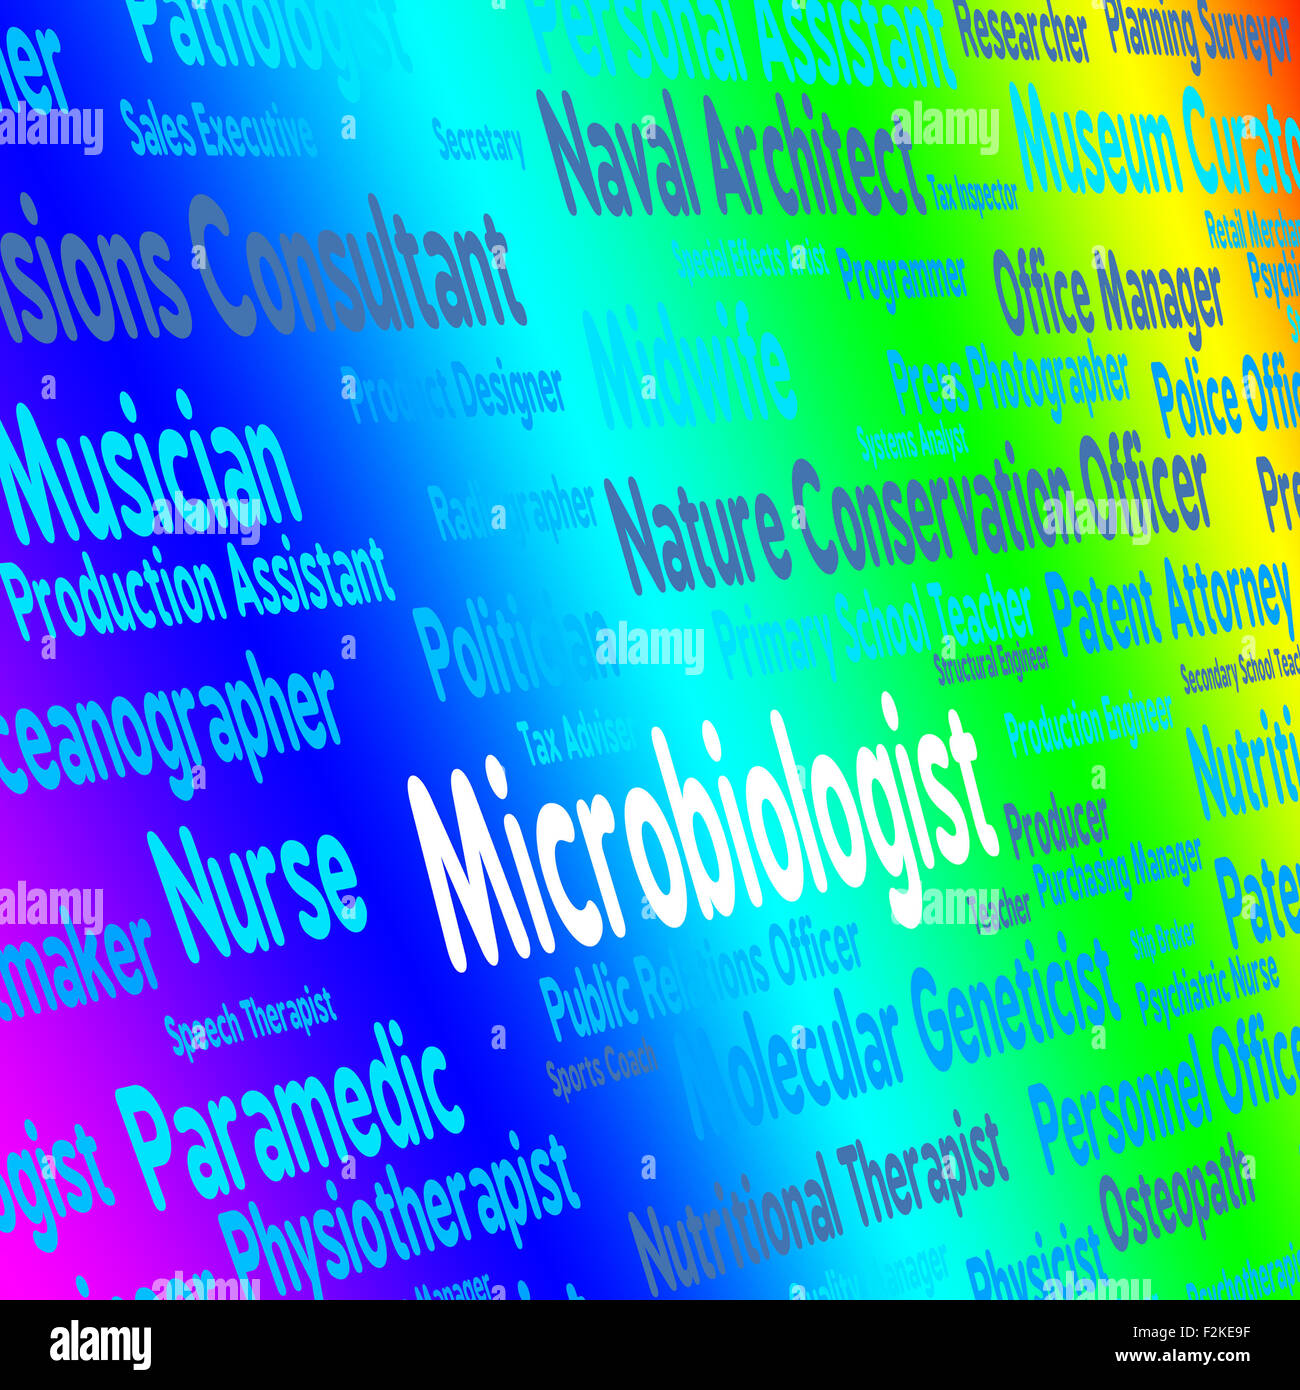 Microbiologist Job Representing Bacteriology Scientists And Position Stock Photo